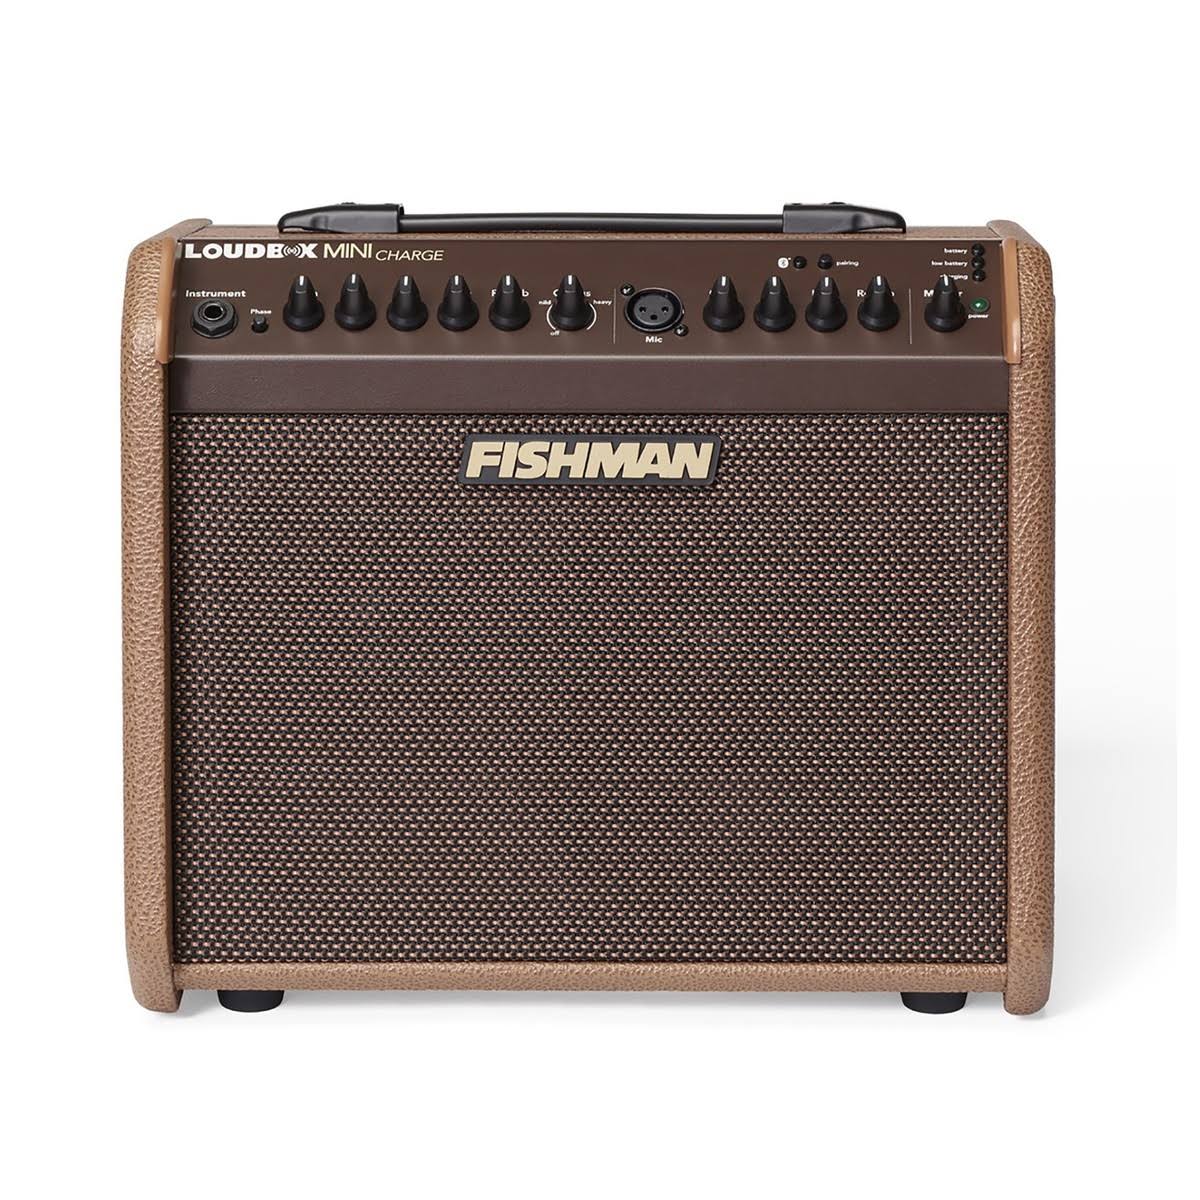 Fishman Loudbox Mini Charge Acoustic Guitar and Vocal Amplifier - 60W